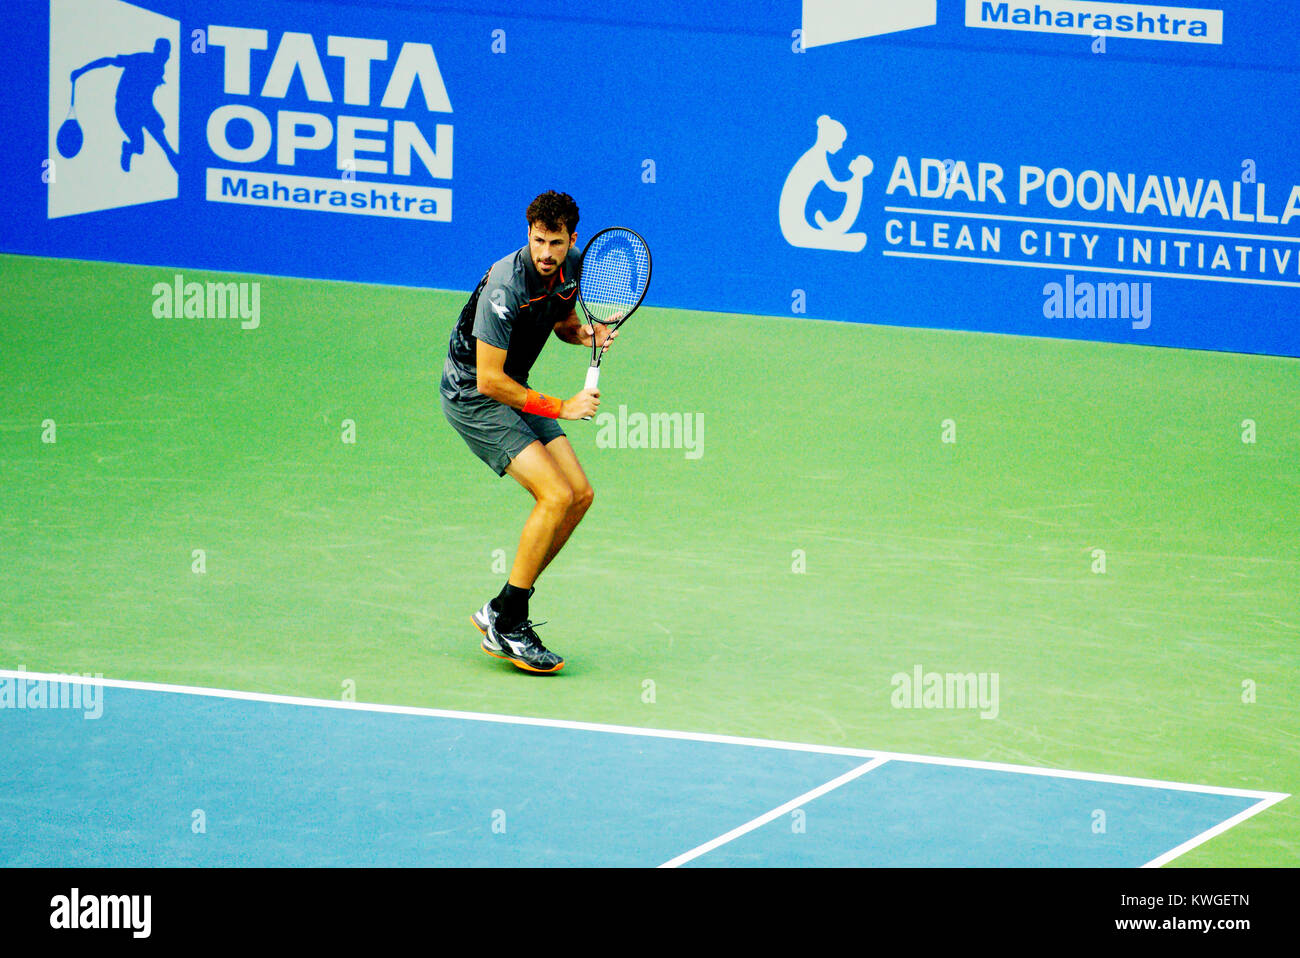 Pune, India. 2nd January 2018. Robin Haase of the Netherlands in action in the first round of Singles competition at Tata Open Maharashtra at the Mahalunge Balewadi Tennis Stadium in Pune, India. Credit: Karunesh Johri/Alamy Live News. Stock Photo